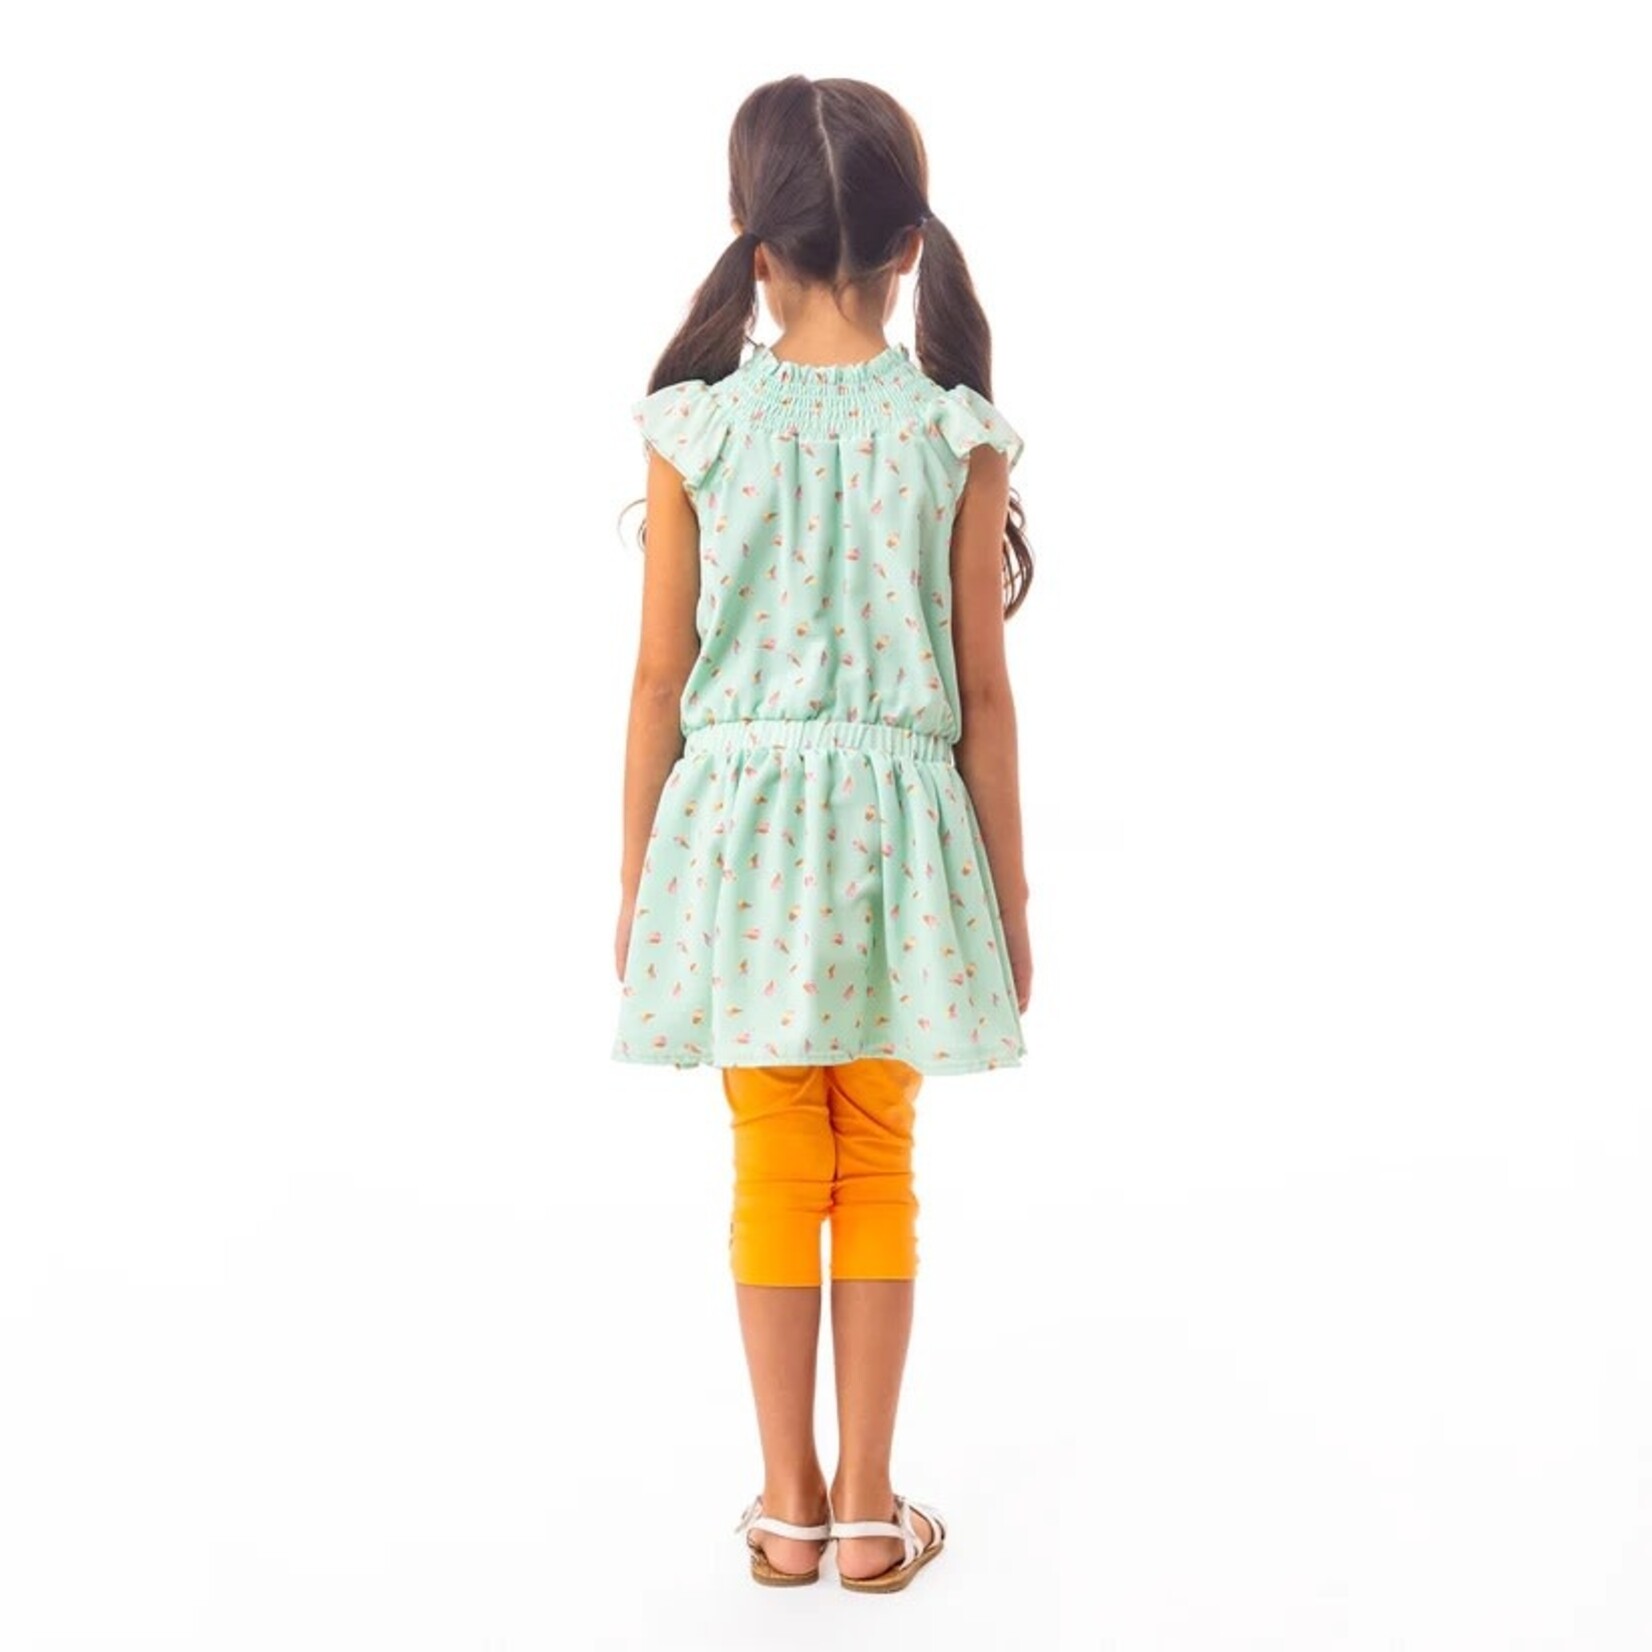 Nanö NANÖ - Mint dress adjusted at waist and allover ice cream cone print 'Vacation moments'